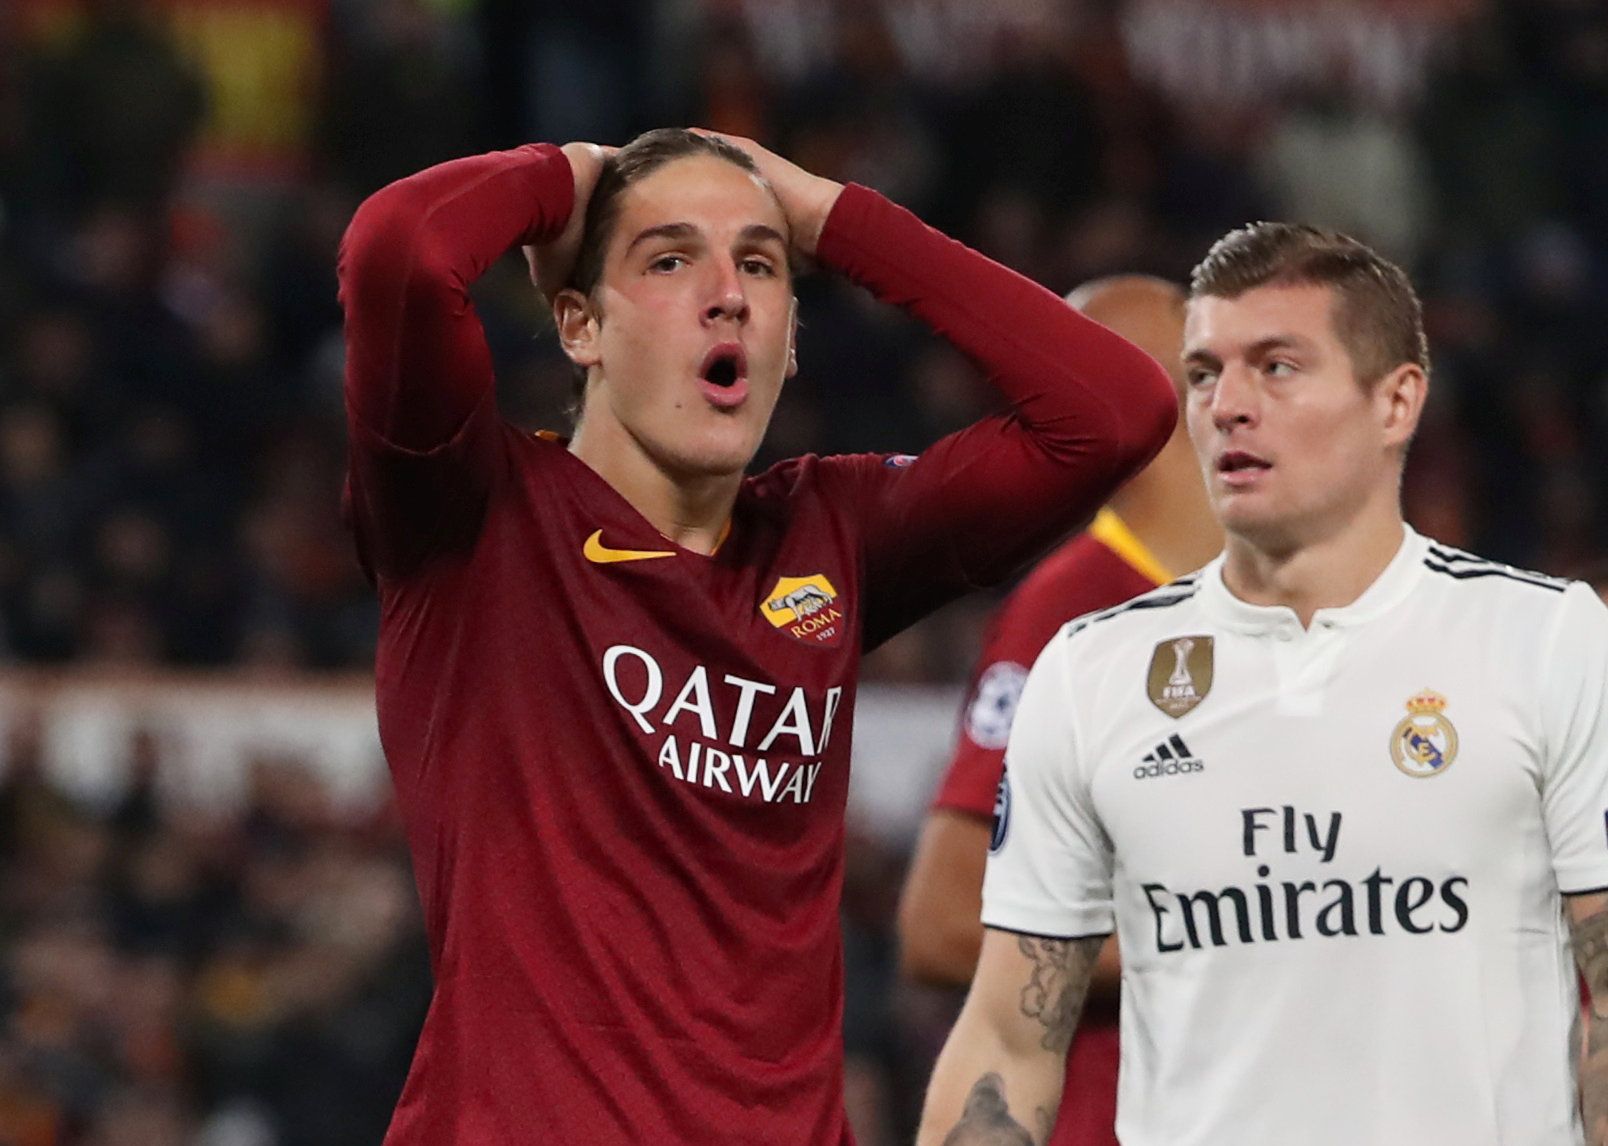 Soccer Football - Champions League - Group Stage - Group G - AS Roma v Real Madrid - Stadio Olimpico, Rome, Italy - November 27, 2018  Roma's Nicolo Zaniolo reacts after a missed chance   REUTERS/Tony Gentile